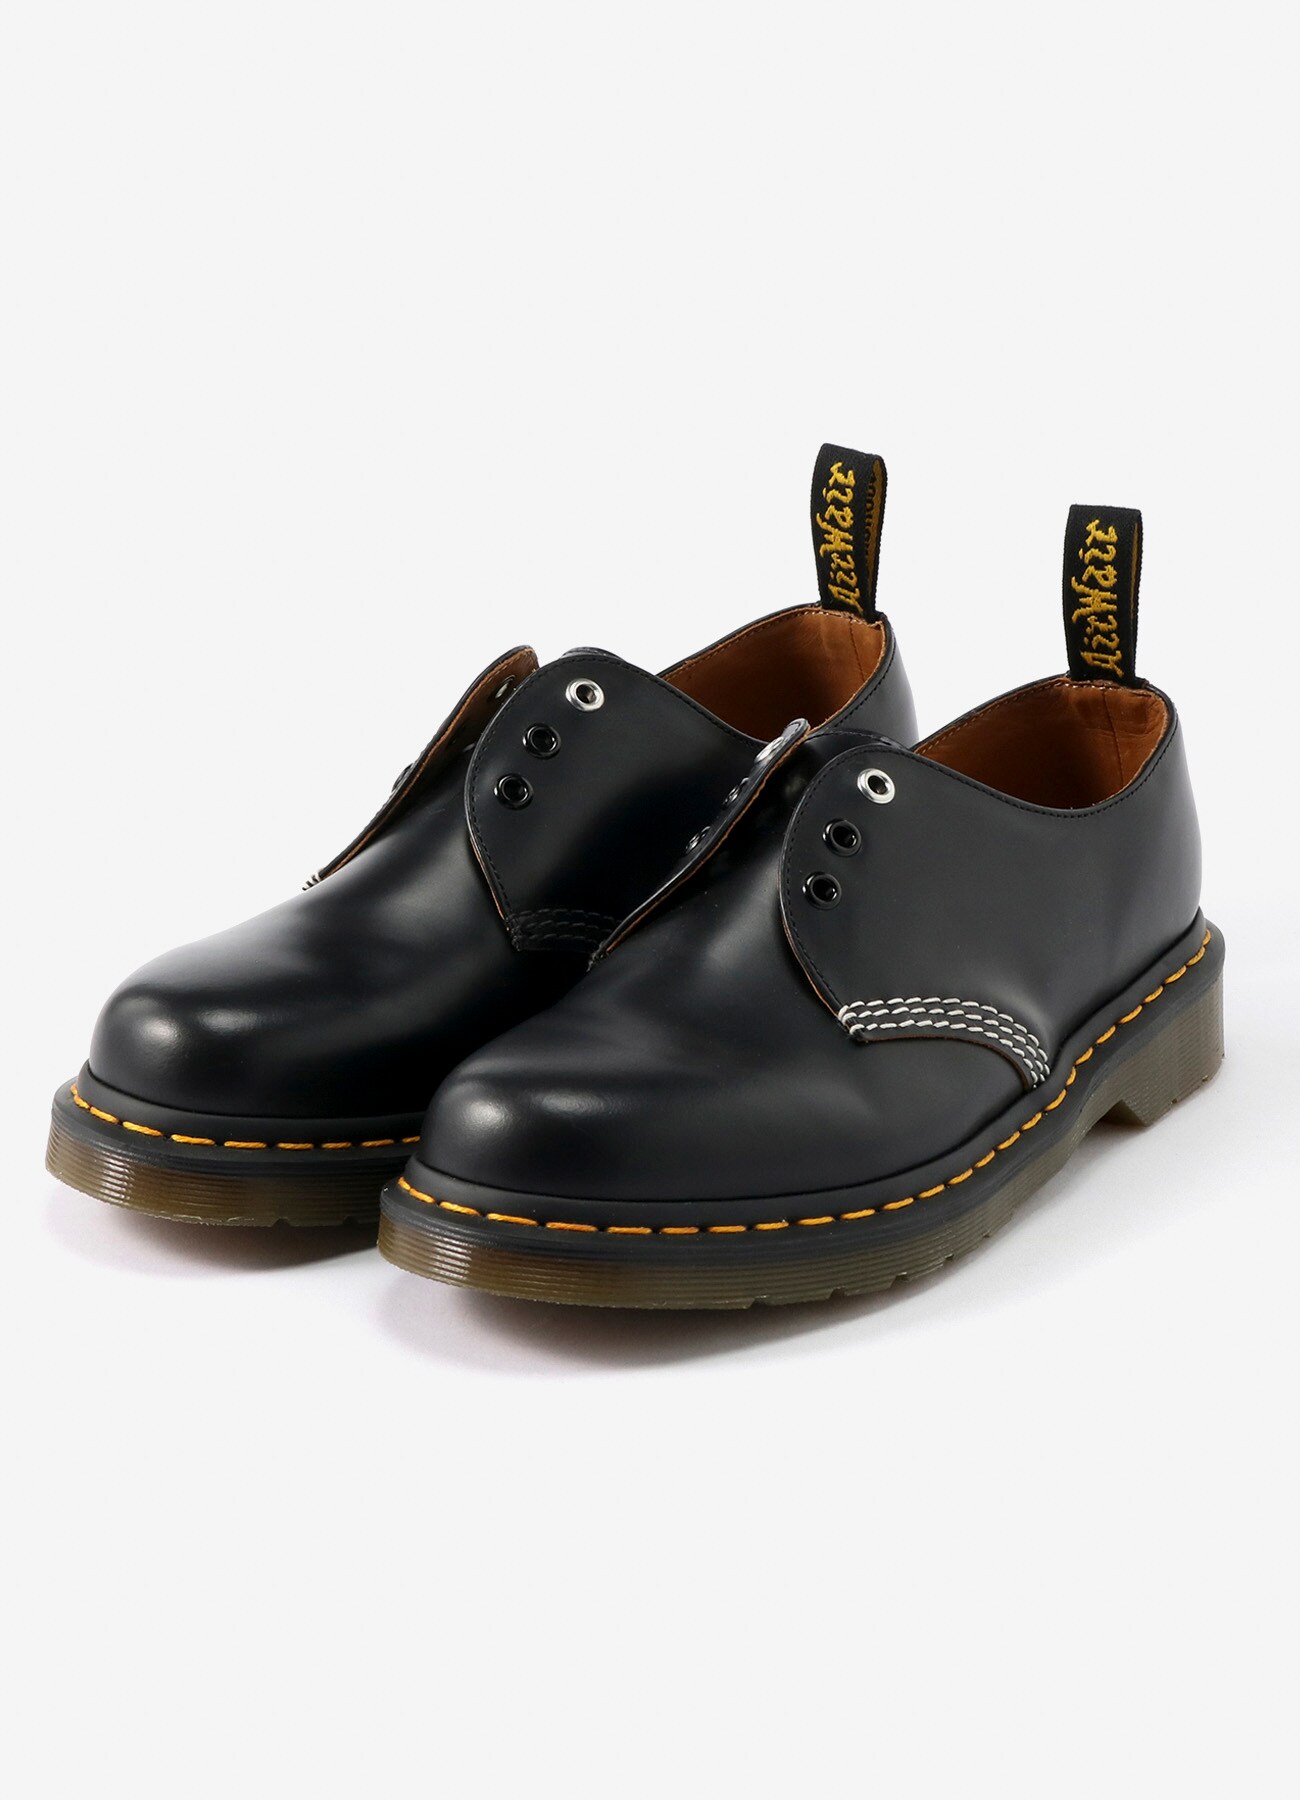 Y’s x Dr.Martens 3 EYE HOLE SHOES